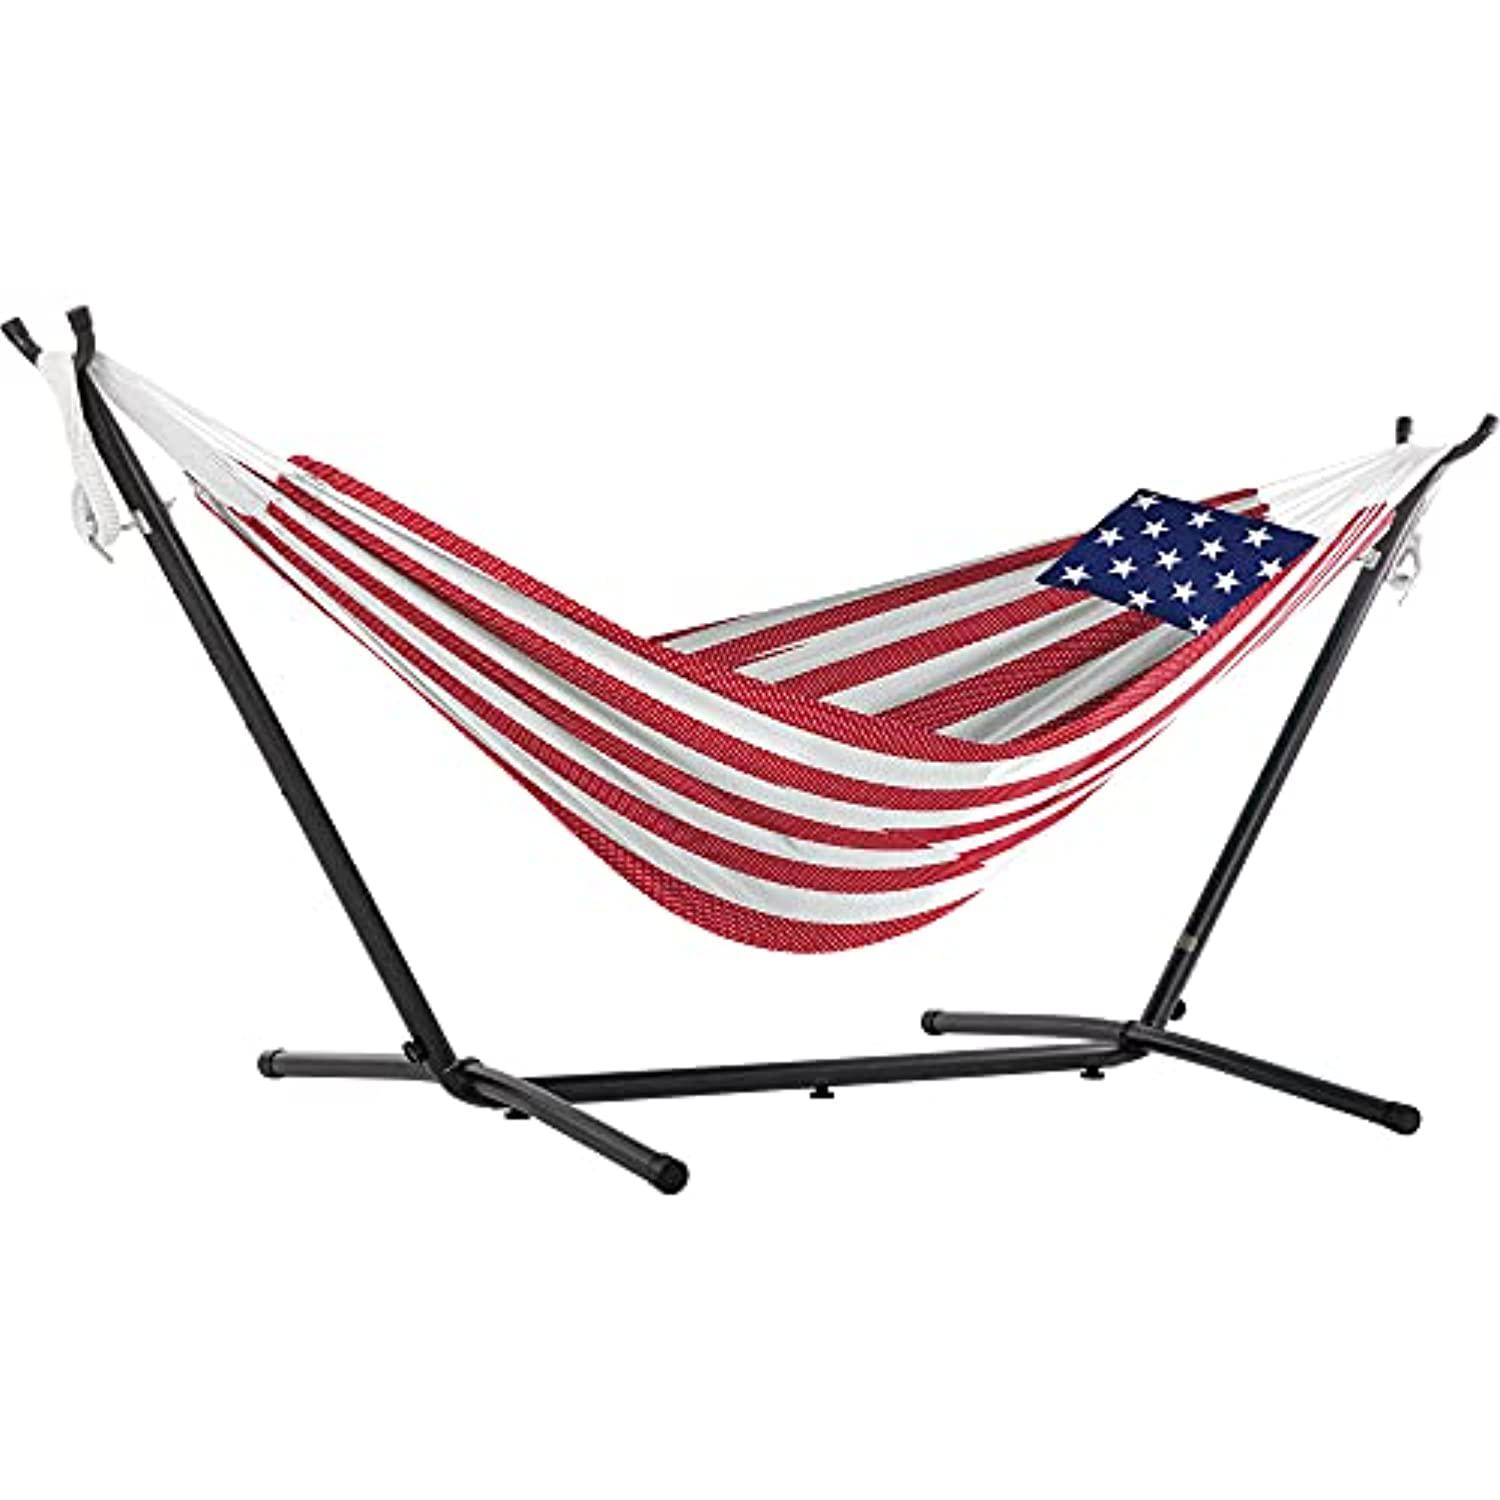 vivere uhsdo9-50 hammock with stand, red, white, blue